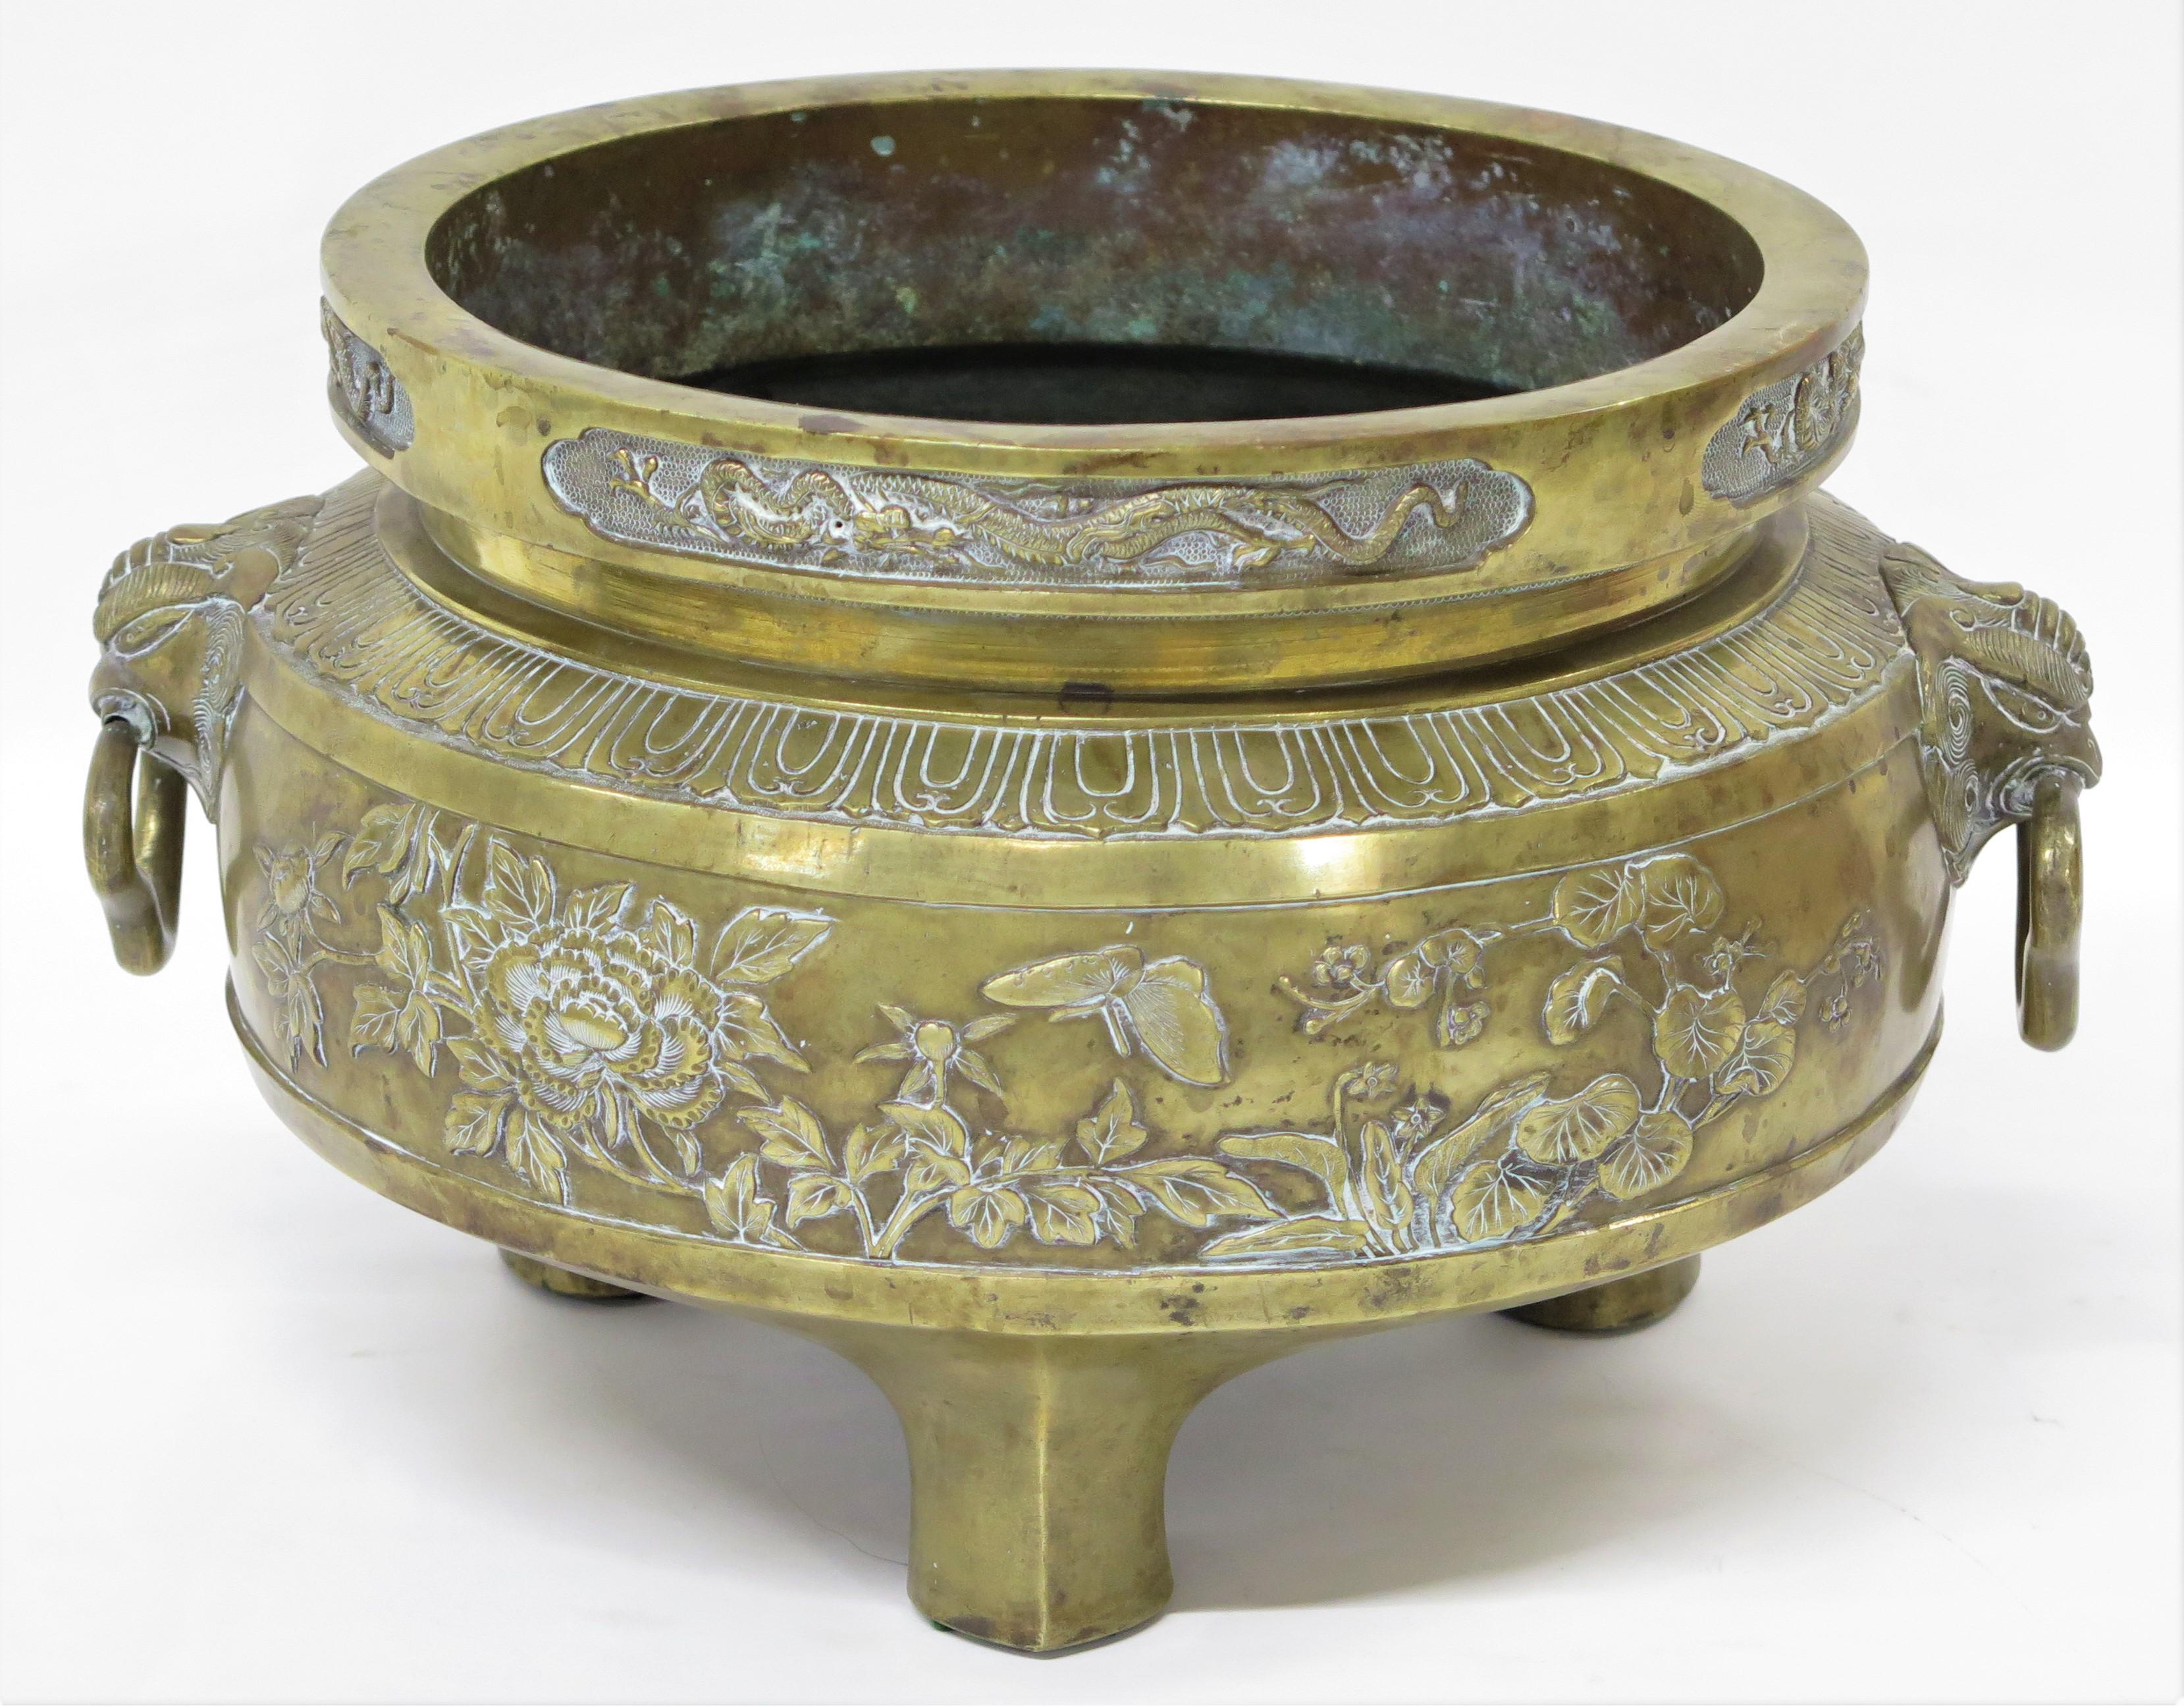 A large brass container three feet, dragons in relif insiad cartouches around top, floral relief band around center body. Rams heads with rings at sides. China. 19th Century.